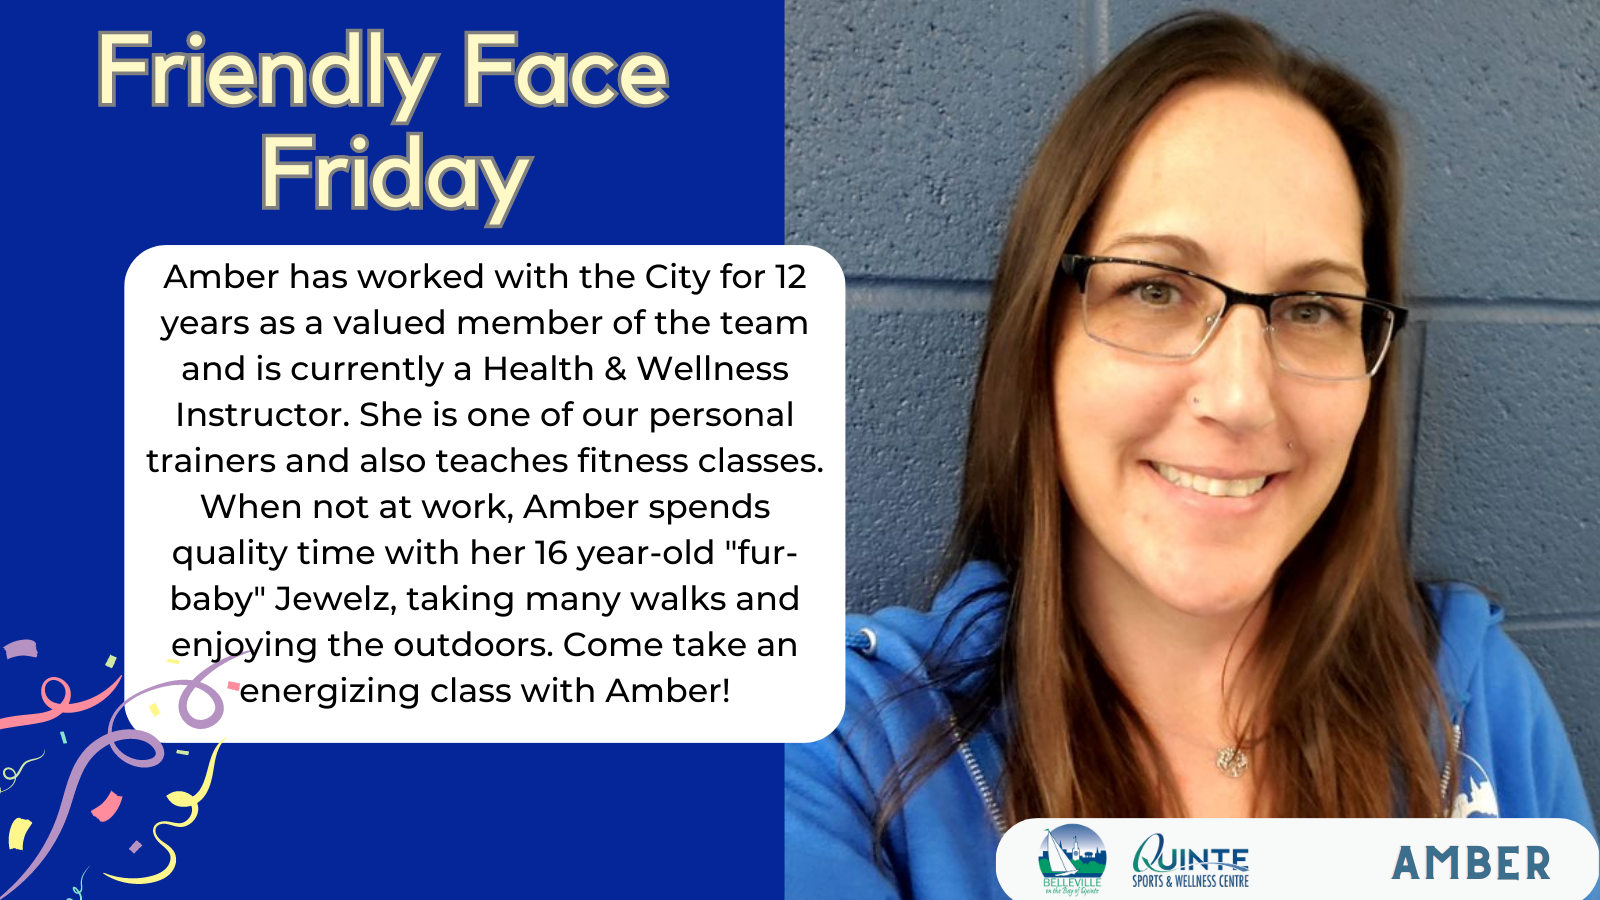 Amber Friendly Face Friday